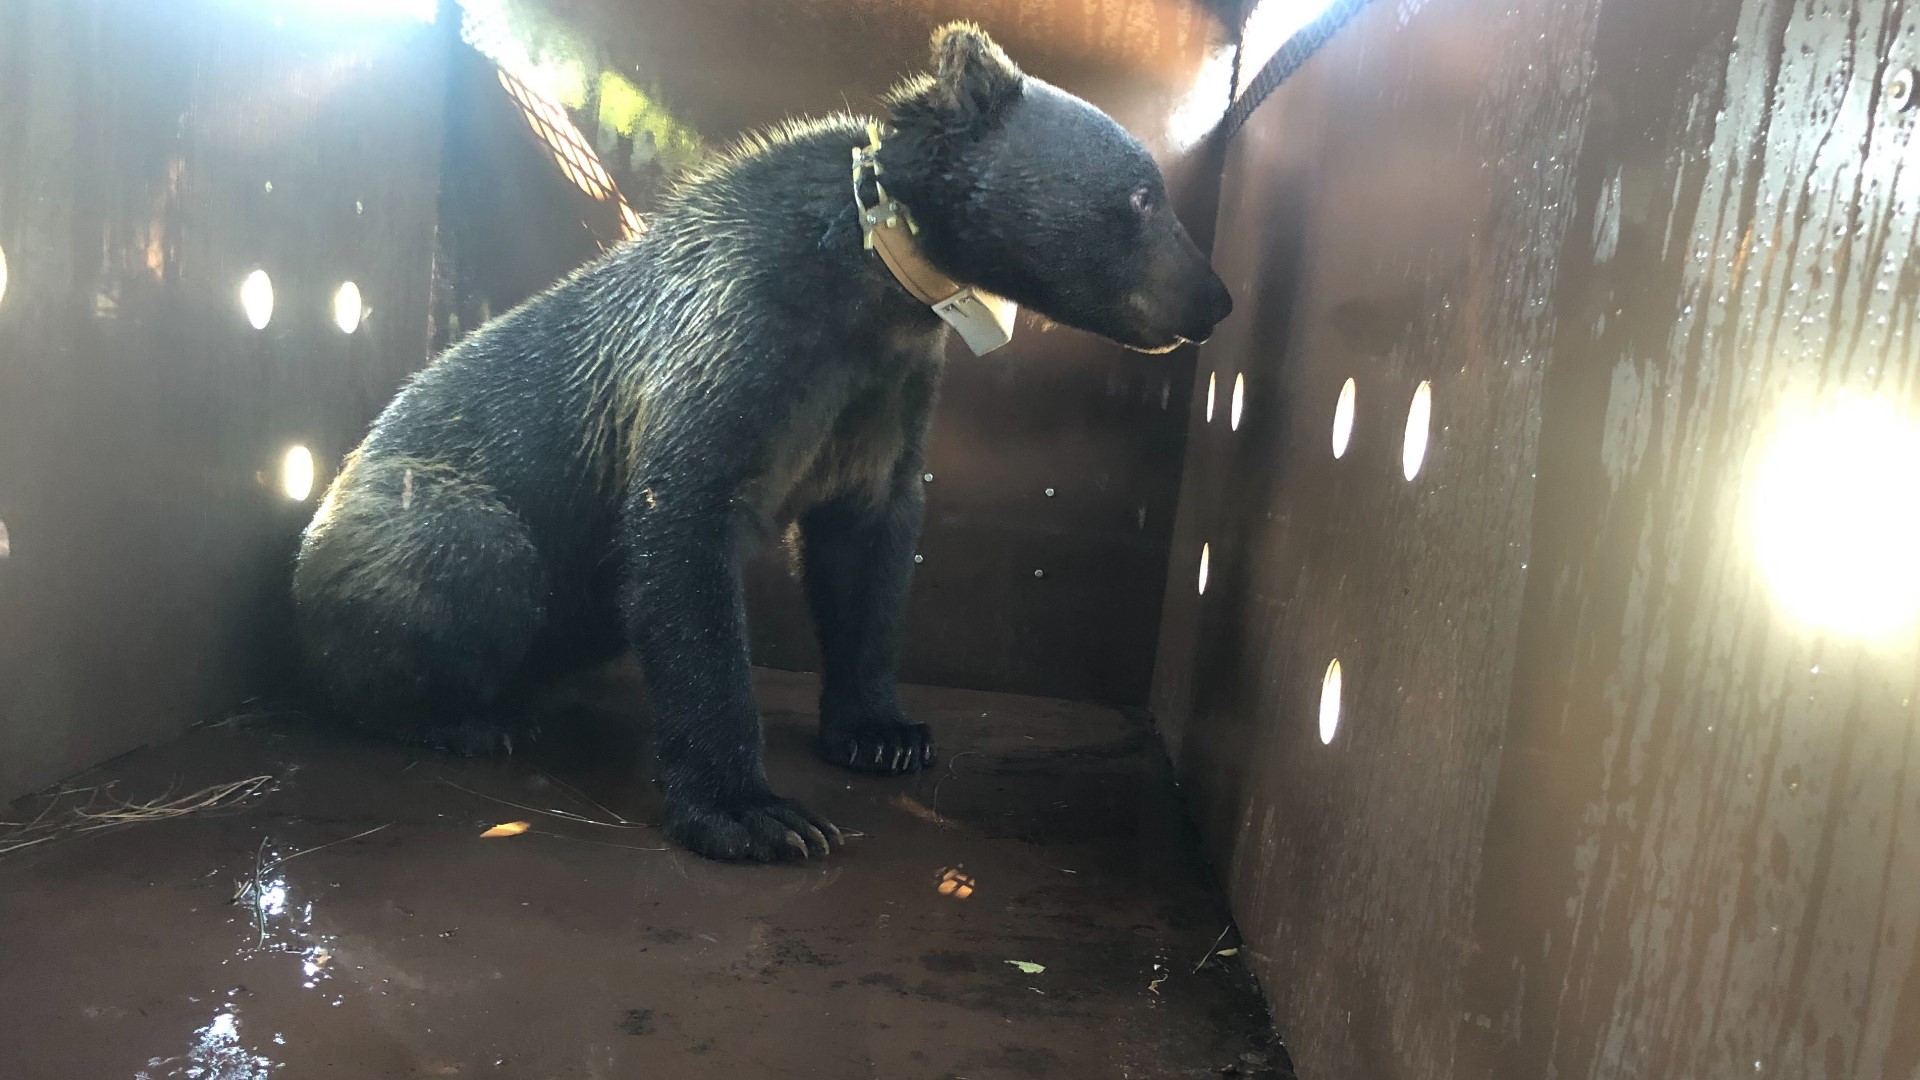 Crews with Fish and Wildlife tranquilized the bear and checked it out in the lab before releasing it back into the wild.